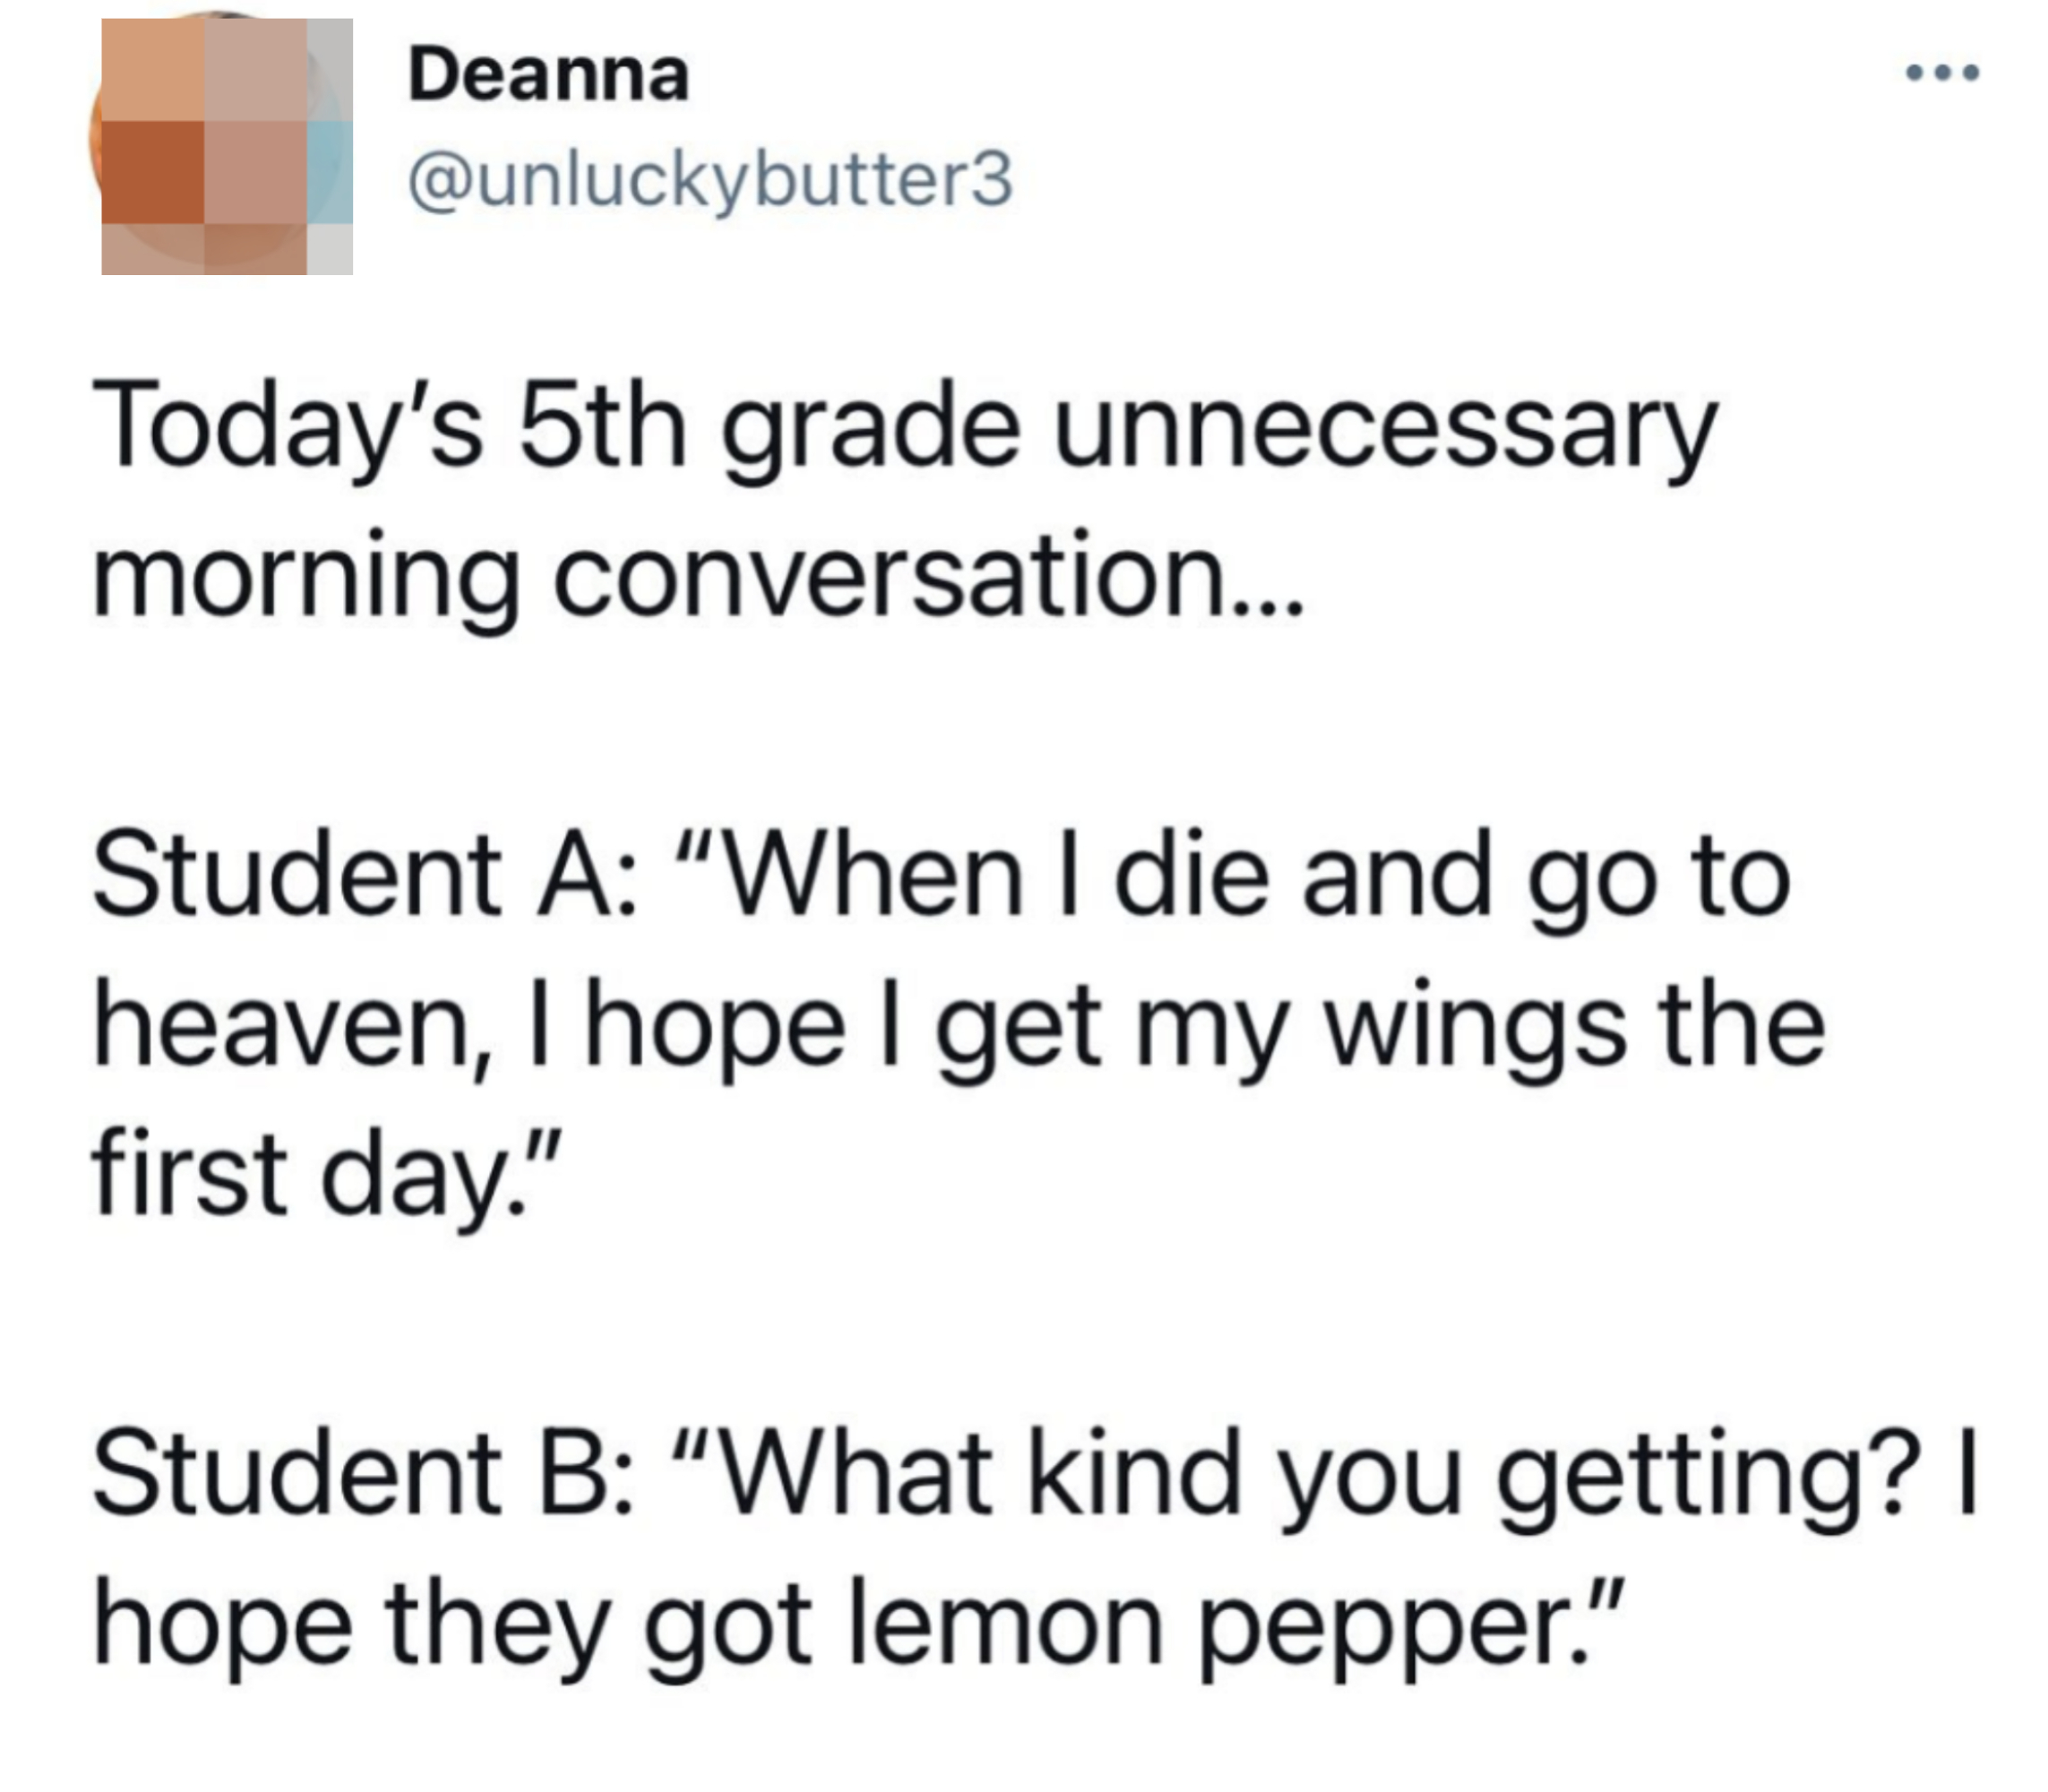 Fifth-grade unnecessary morning conversation: &quot;Student A: When I die and go to heaven, I hope I get my wings the first day; Student B: What kind you getting? I hope they got lemon pepper&quot;